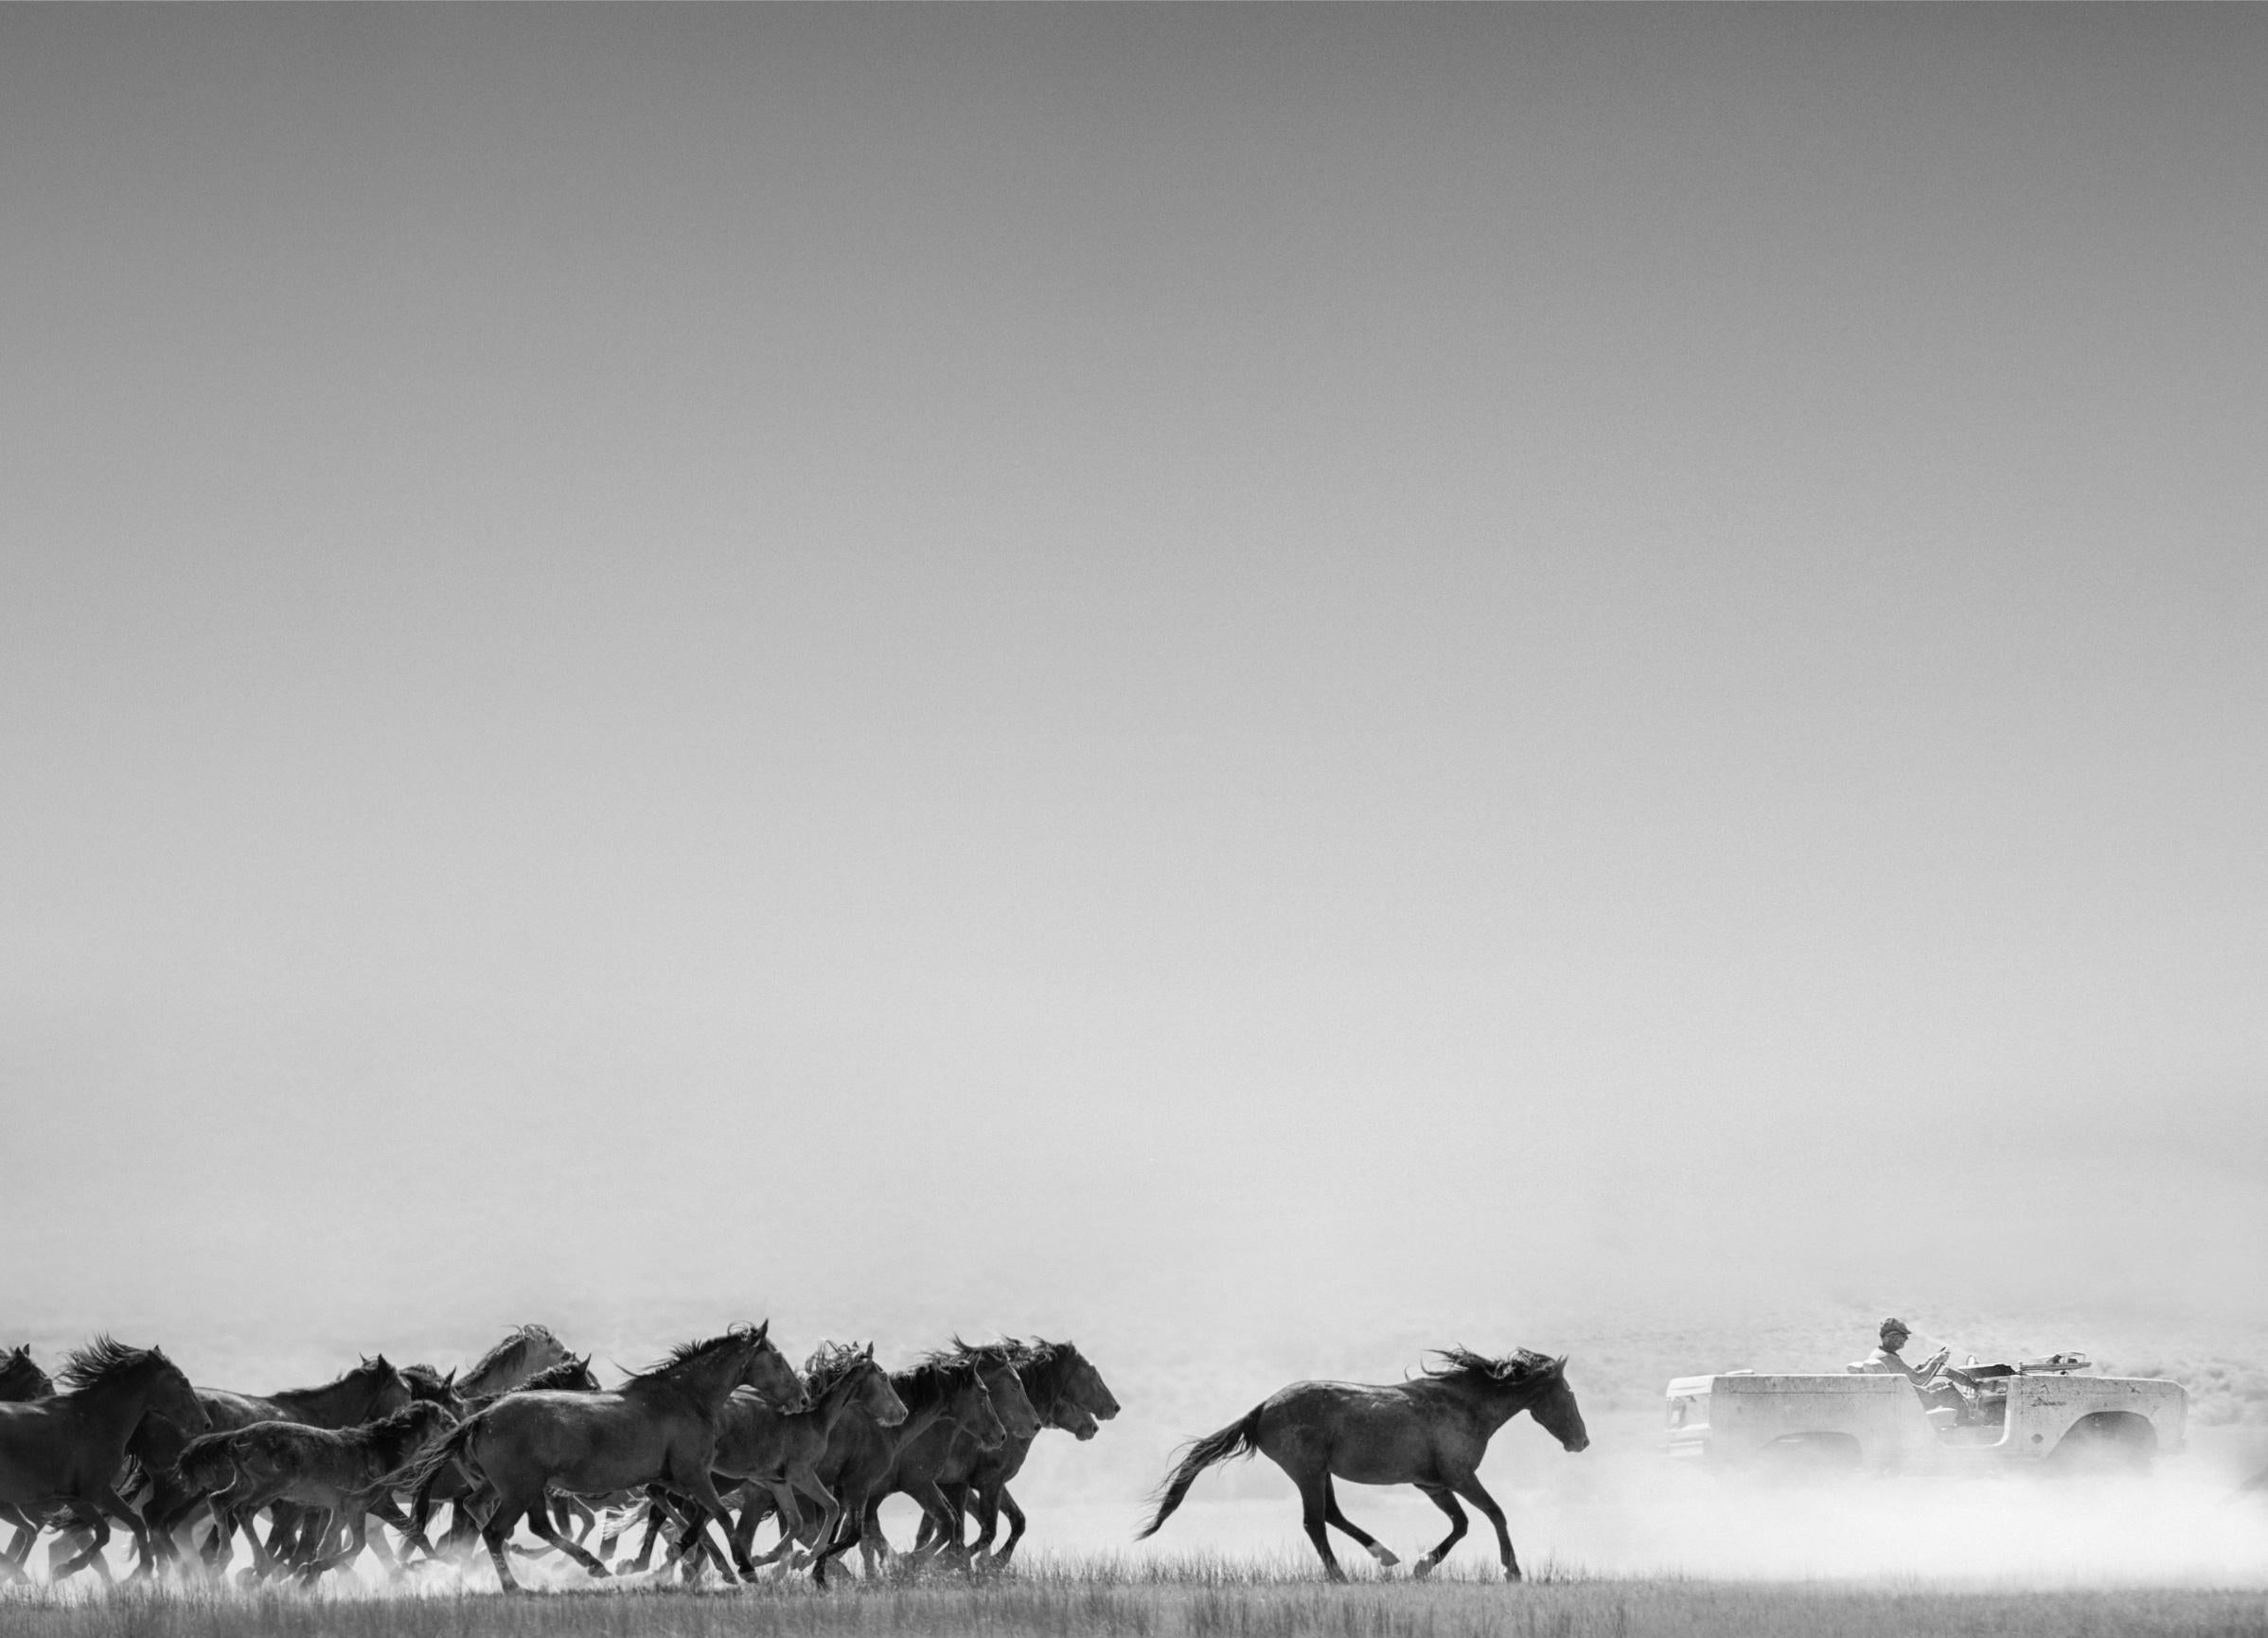 Shane Russeck Black and White Photograph - AMERICAN HORSE POWER 60x40 Photography Wild Horses Mustangs FORD BRONCO ICON